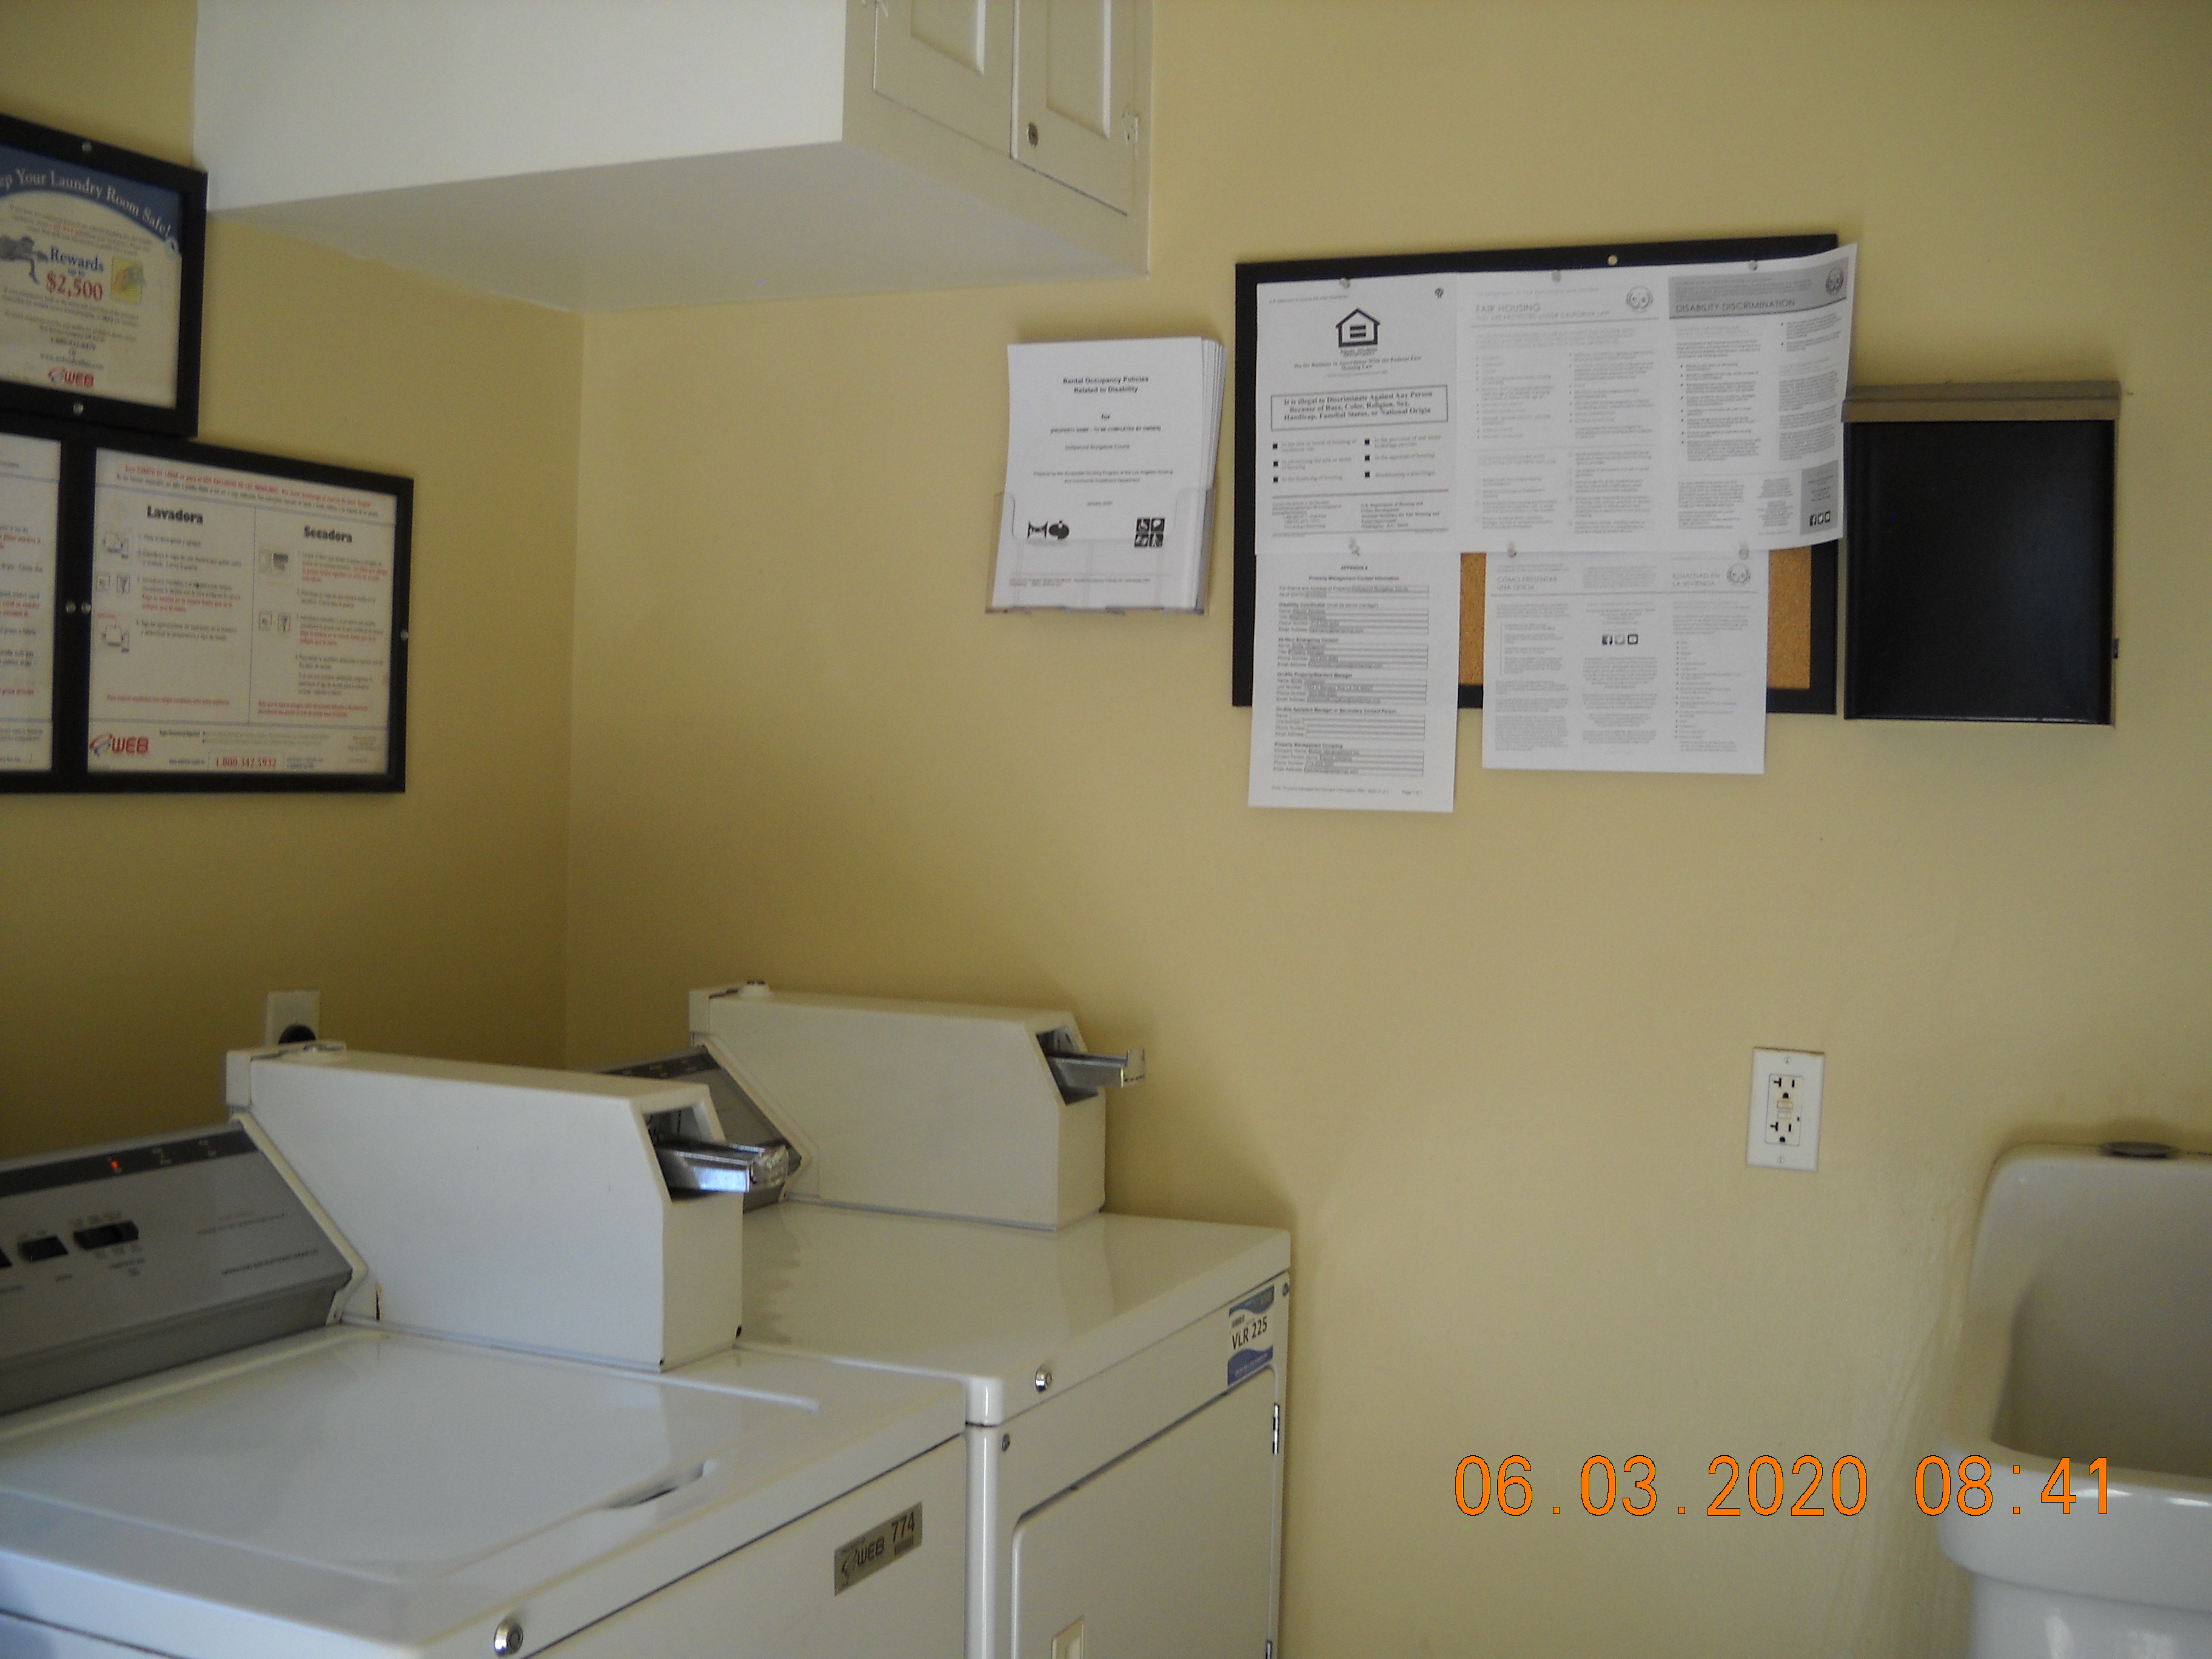 Laundry room with two machines and a sink visible.There are multiple signs posted on the wall and a small cabinet that sits overhead.